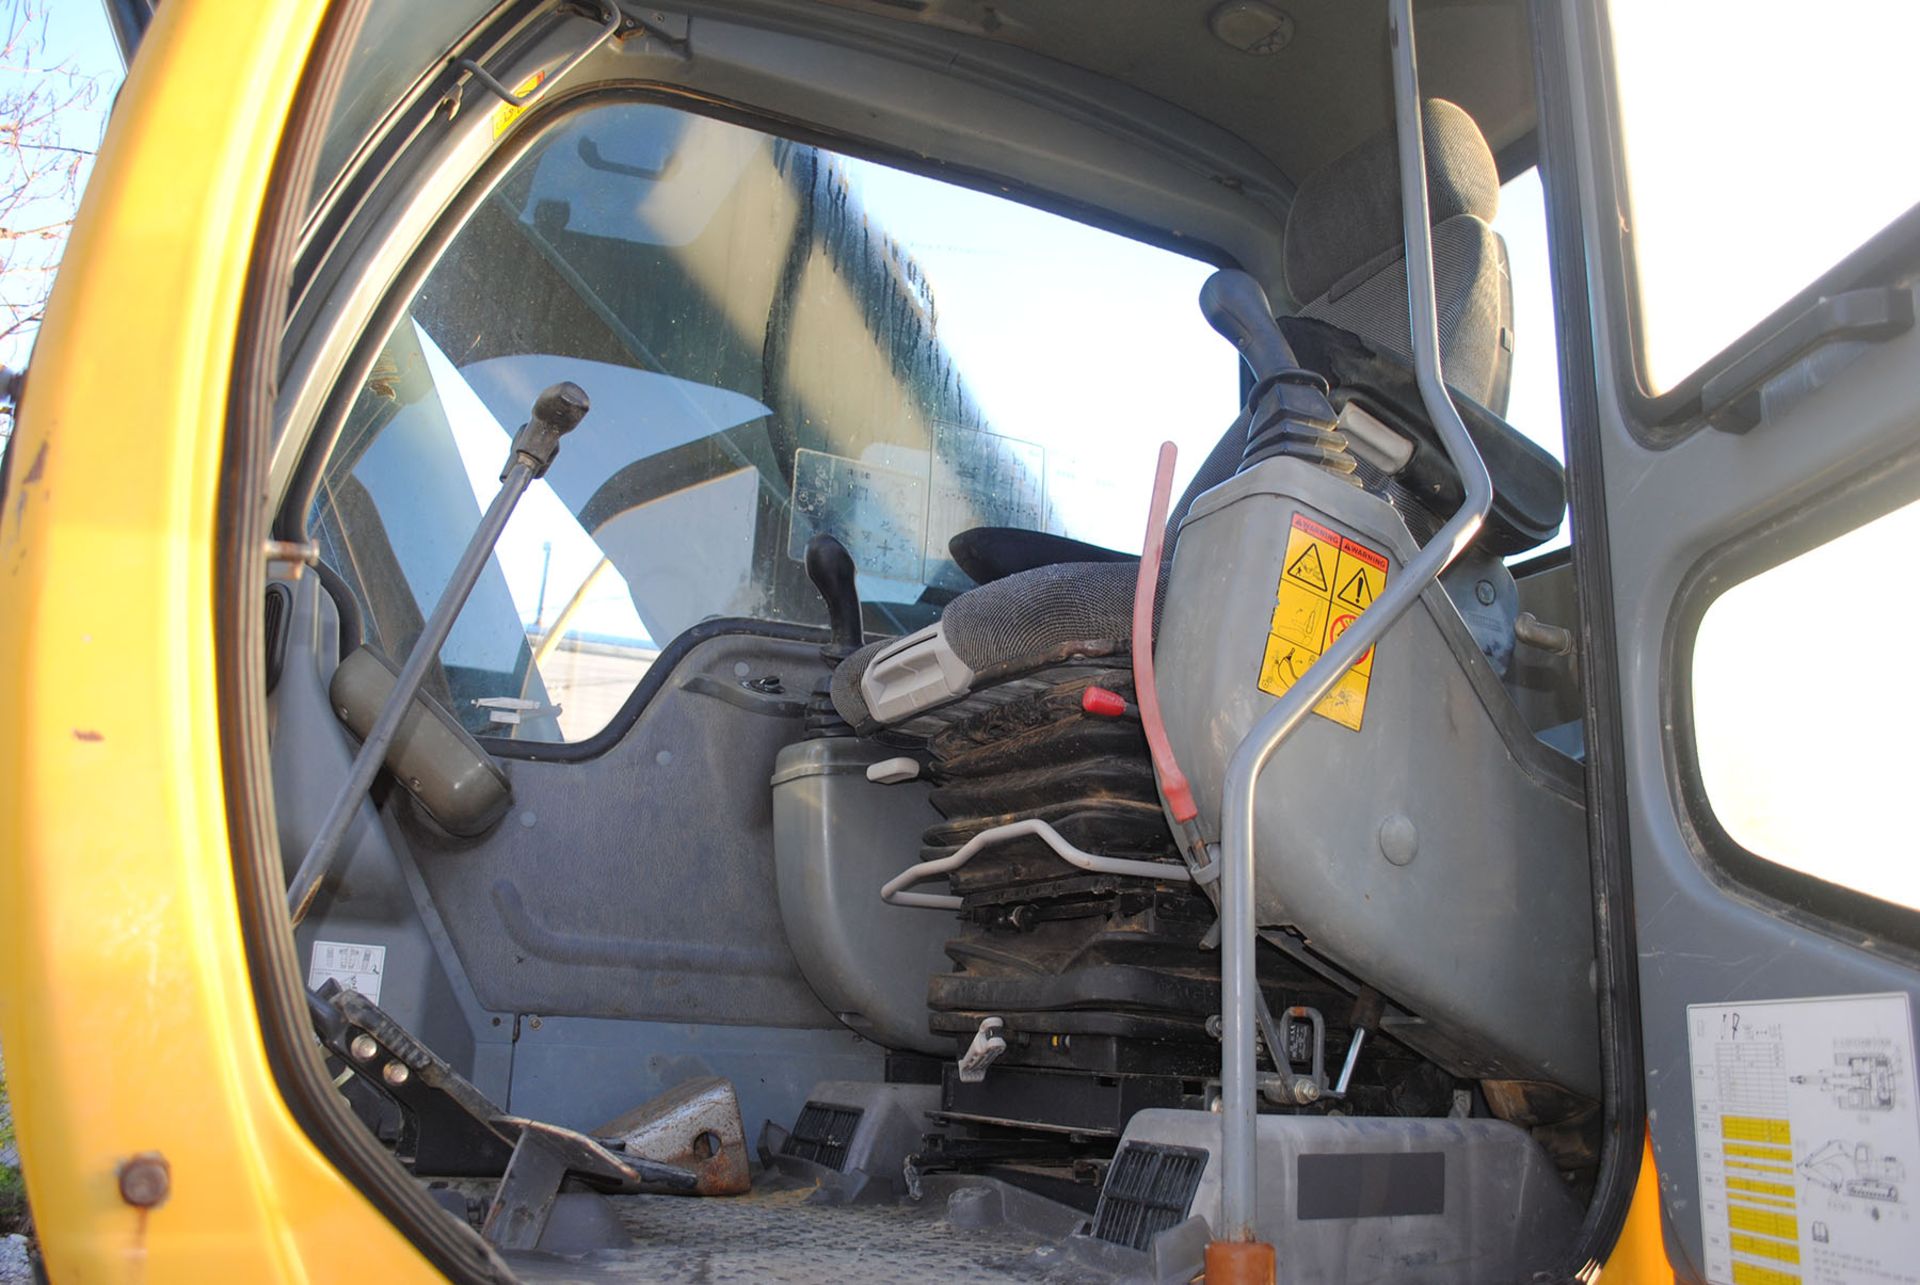 2001 VOLVO E290LC HYDRAULIC EXCAVATOR; PIN EC2906LCC-03657, 10,500 COUNTERWEIGHT, ENCLOSED CAB - Image 6 of 6